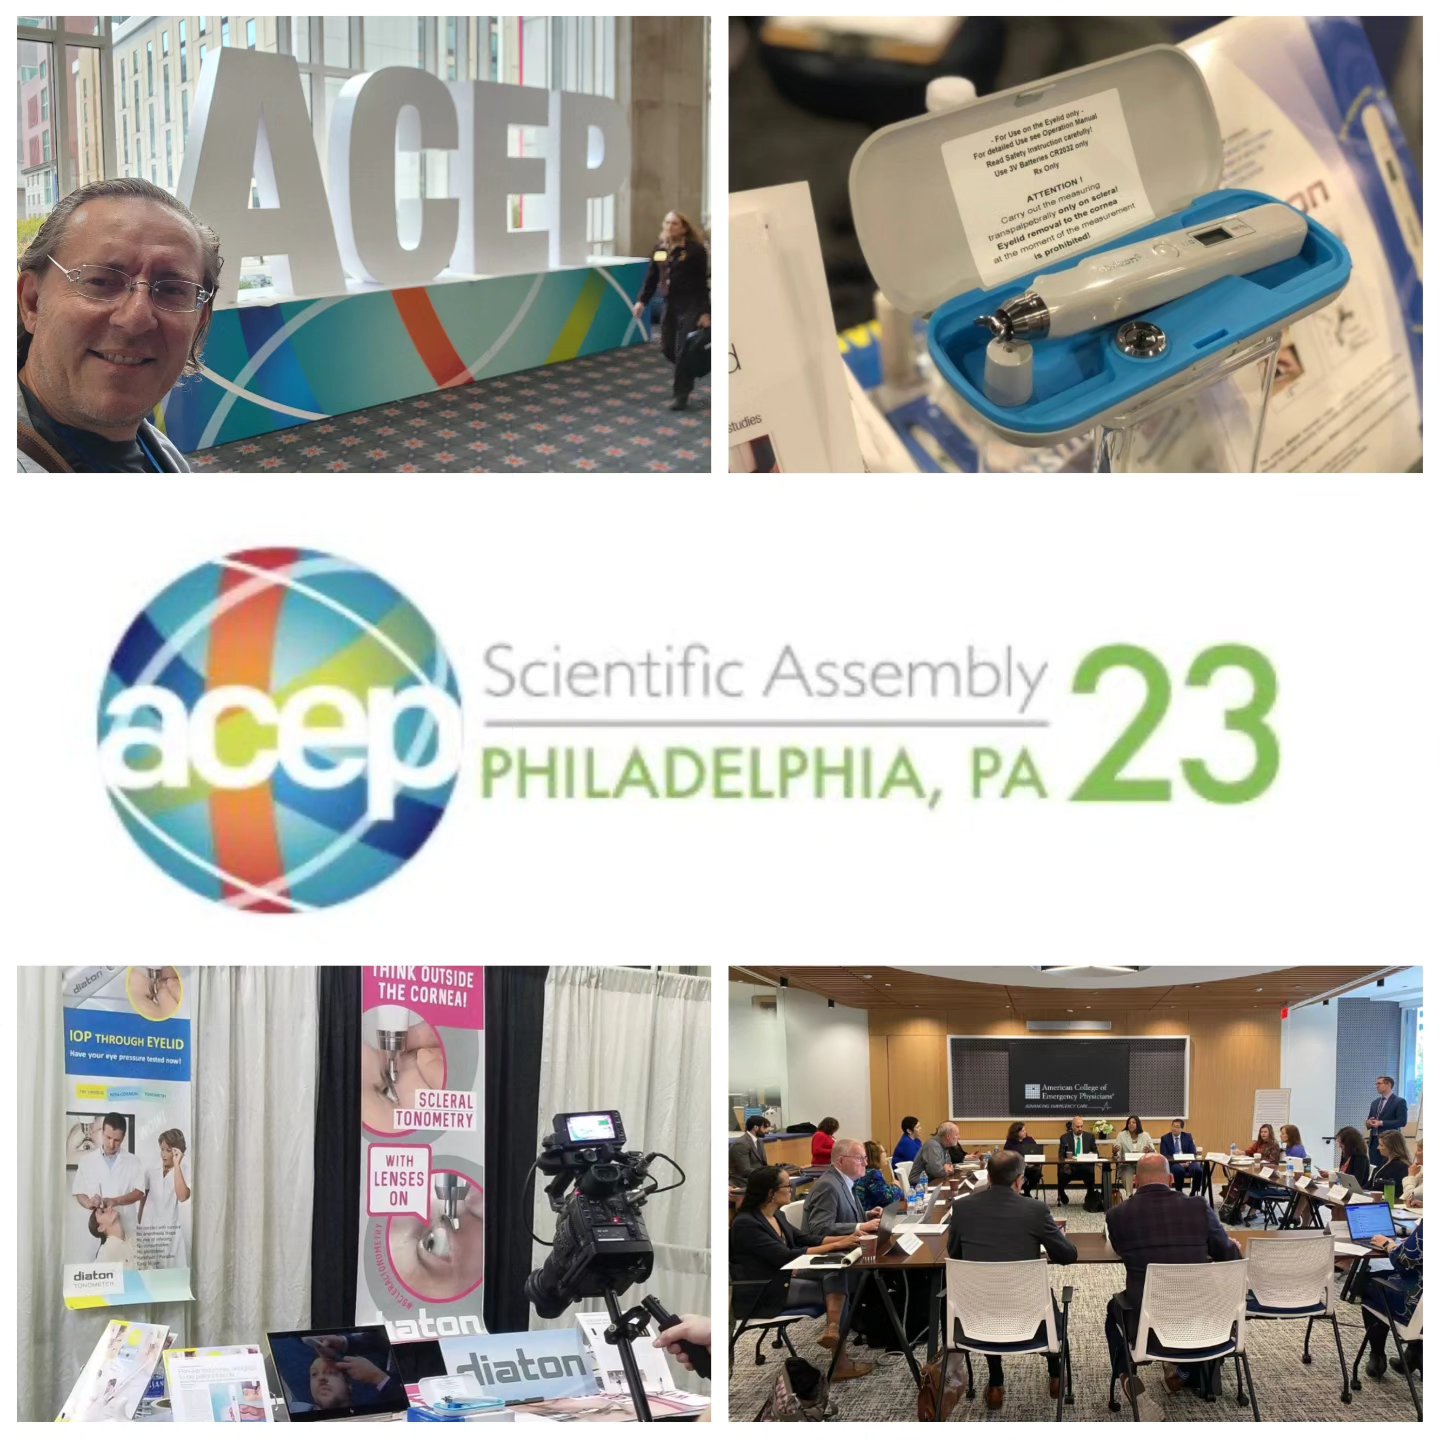 A Leap Forward in Emergency Eye Care: Diaton Tonometer’s Benefits in Hospital Scenarios Presented at ACEP Scientific Assembly